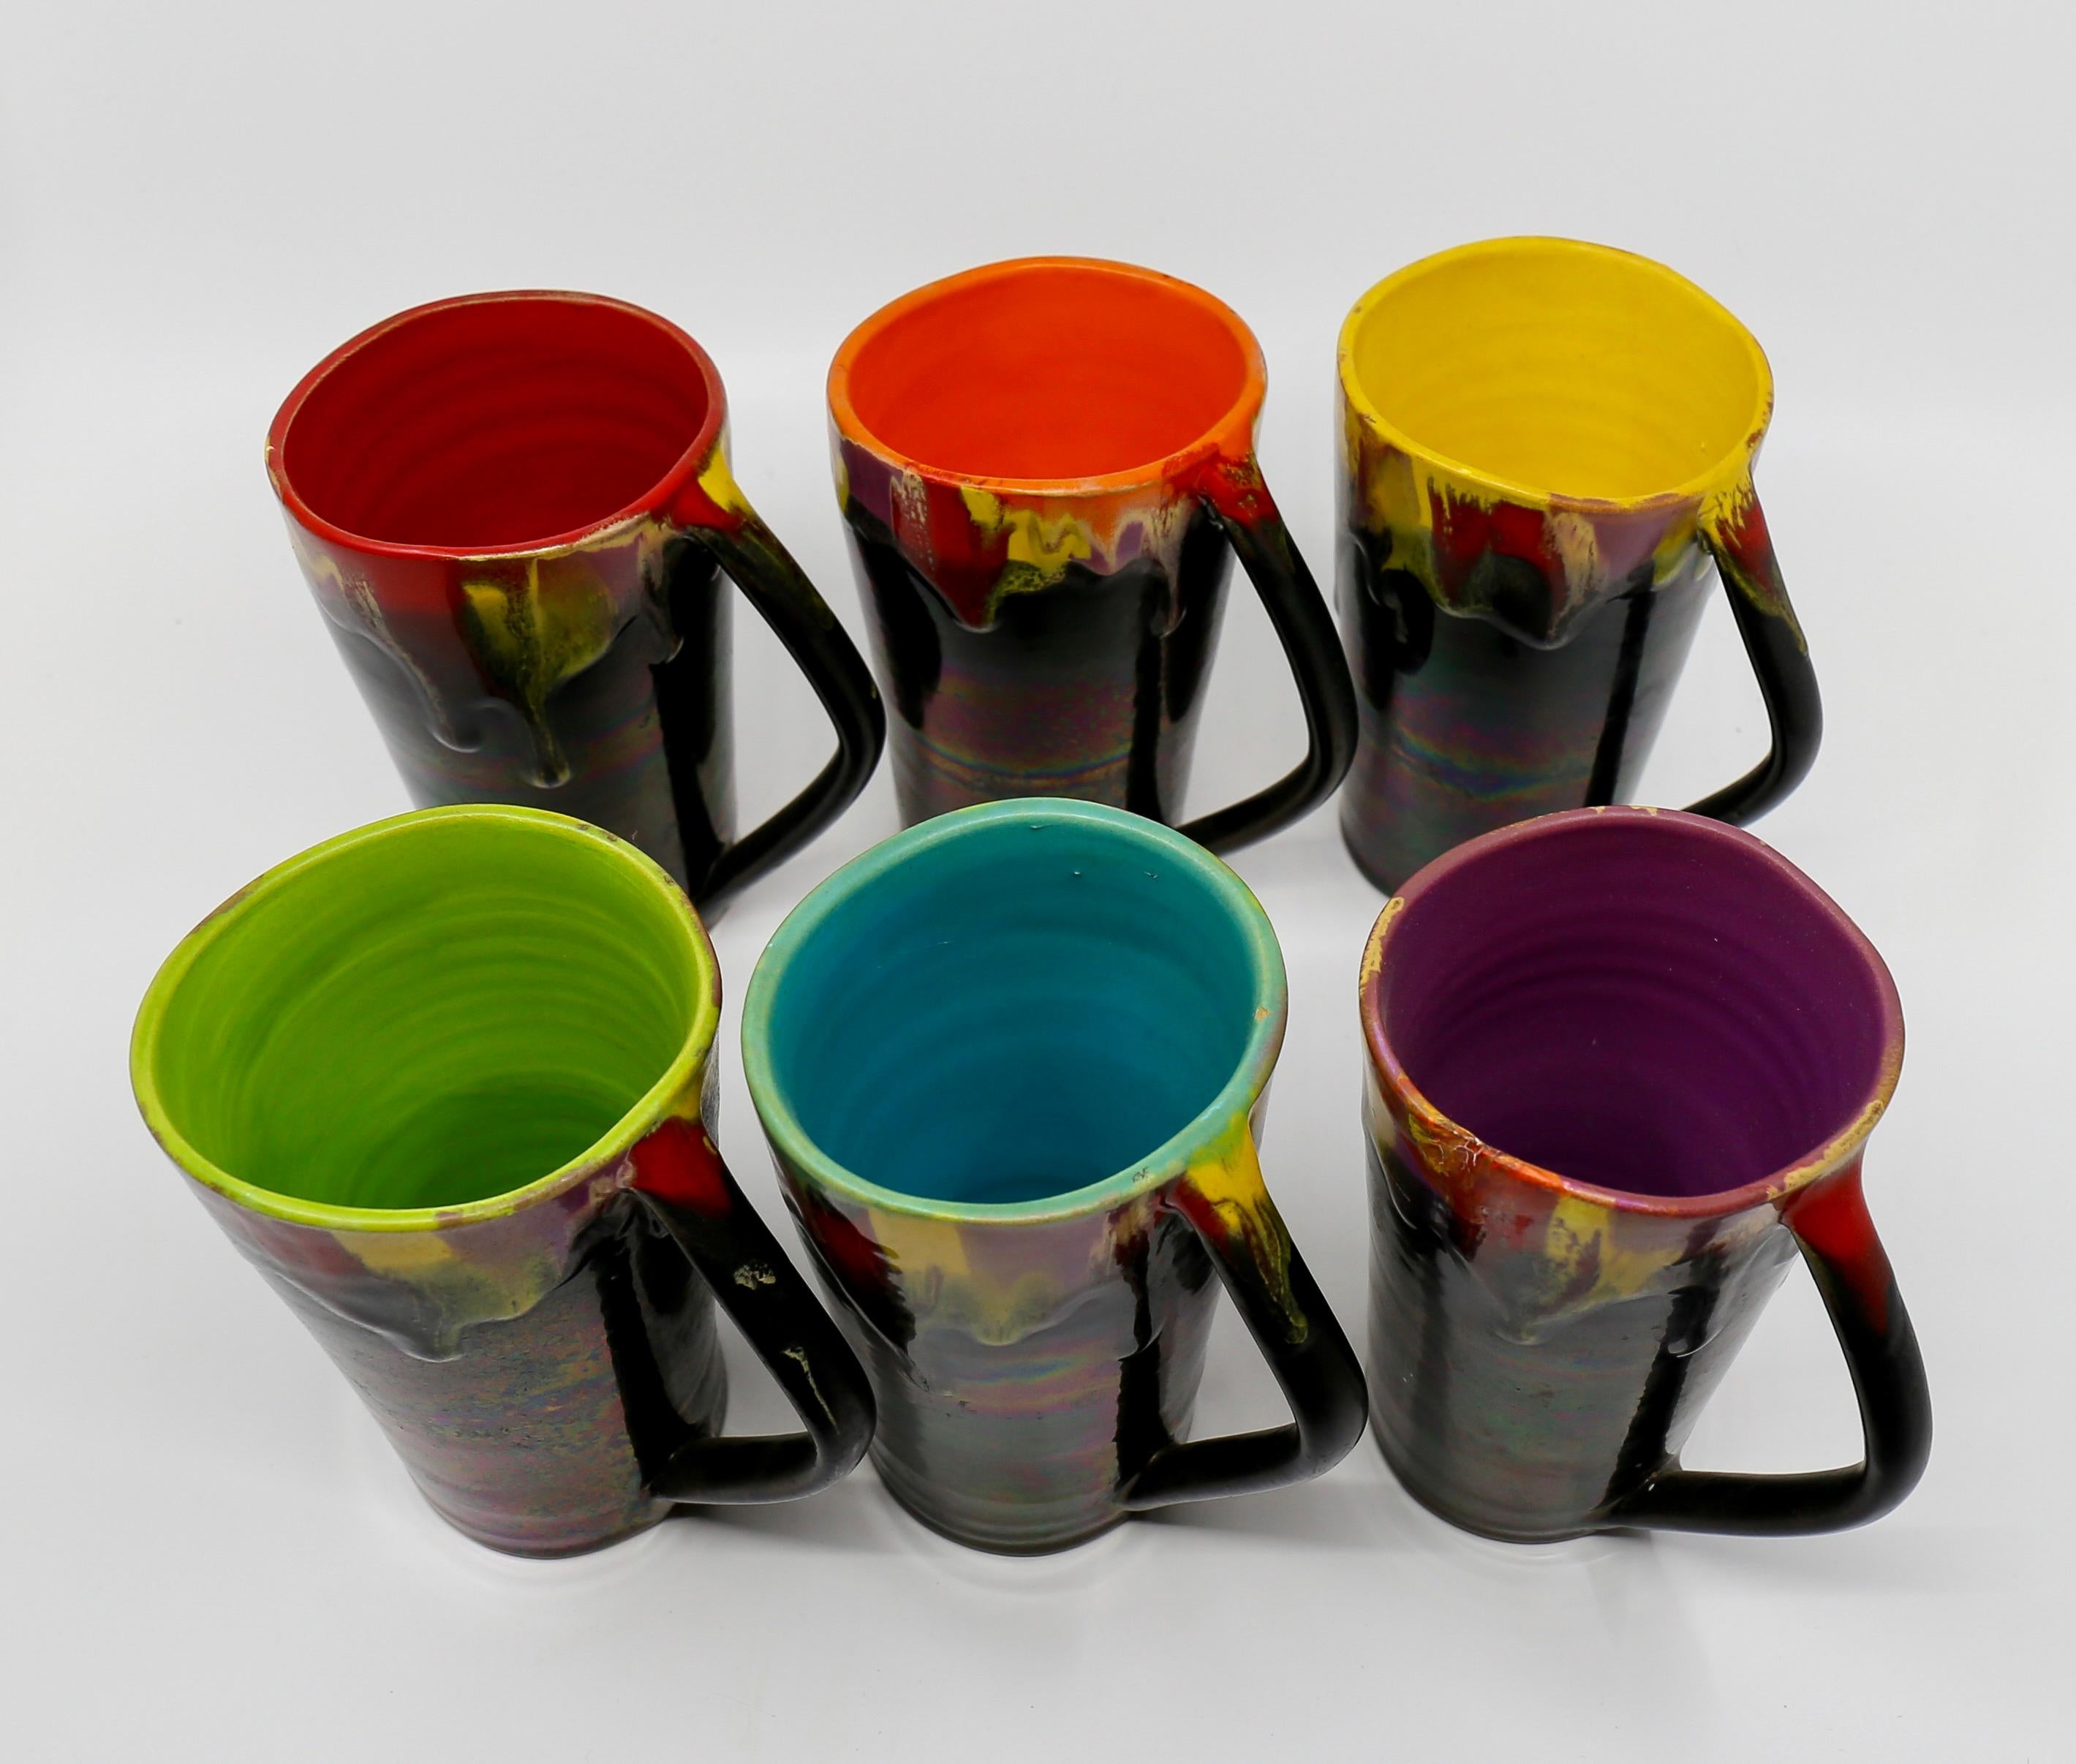 Vallauris Ceramic Pitcher with Six Cups, France, 1950s For Sale 5